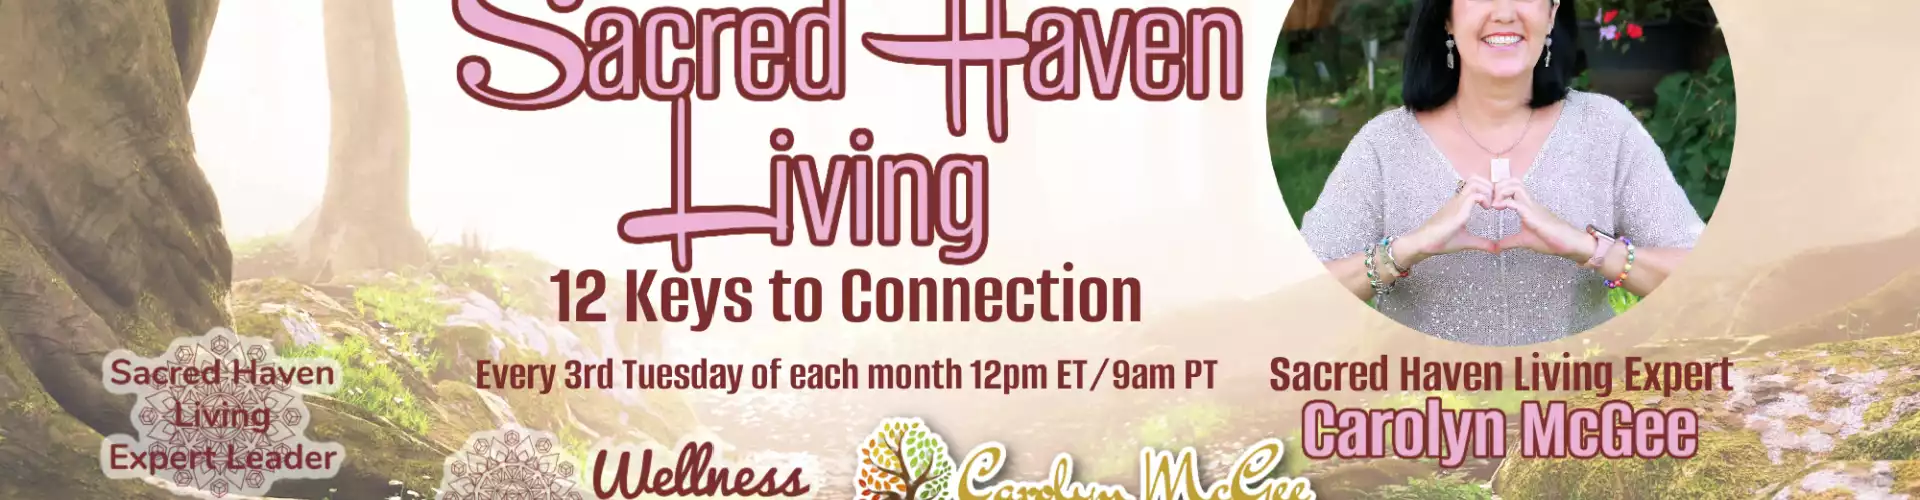 Sacred Haven Living with WU Expert Leader Carolyn McGee